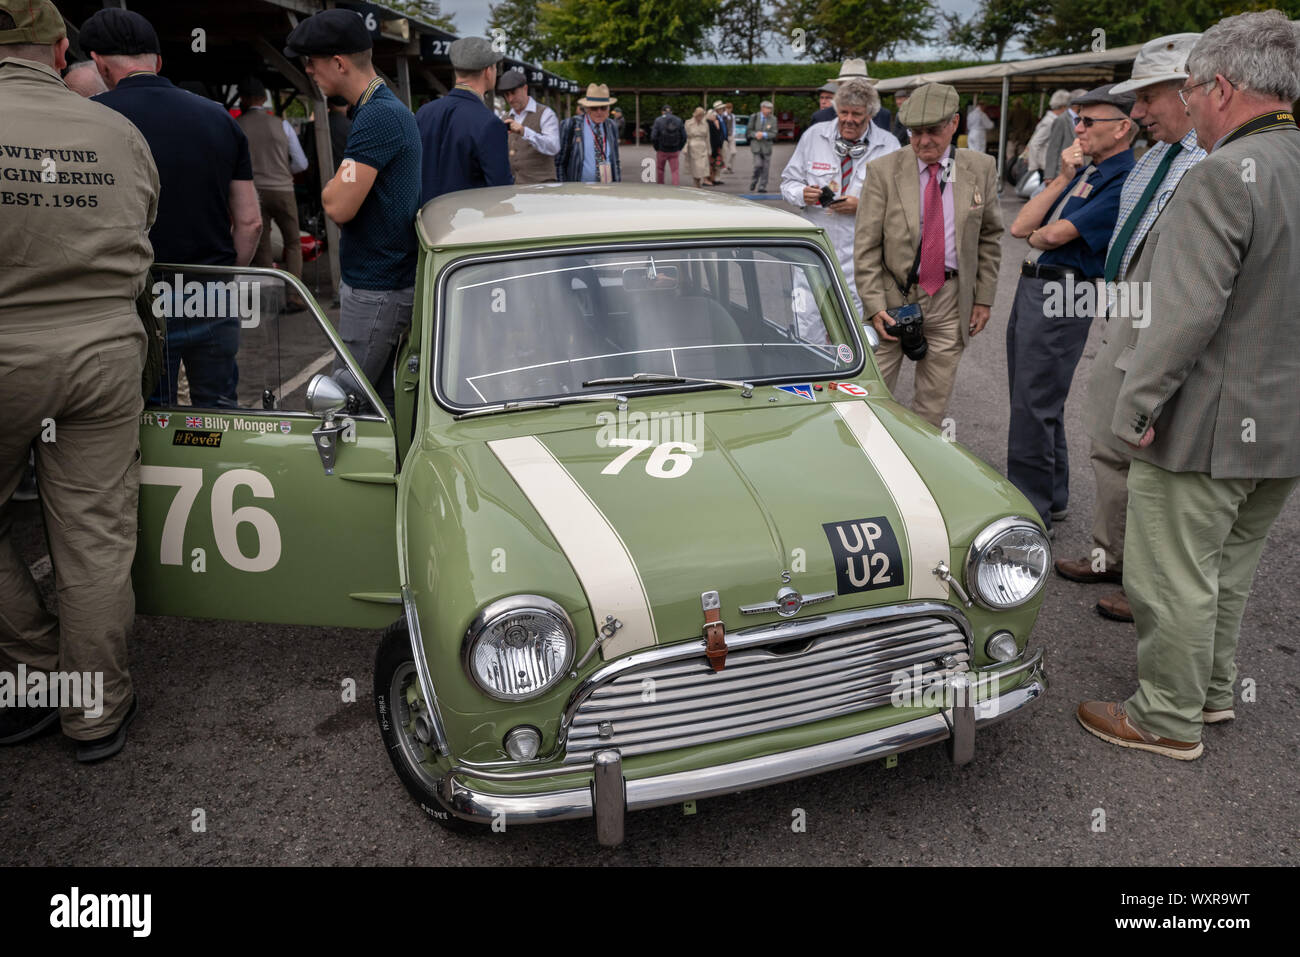 Vintage Mini Cooper on display in the paddock during the Goodwood Revival car festival, UK. Stock Photo